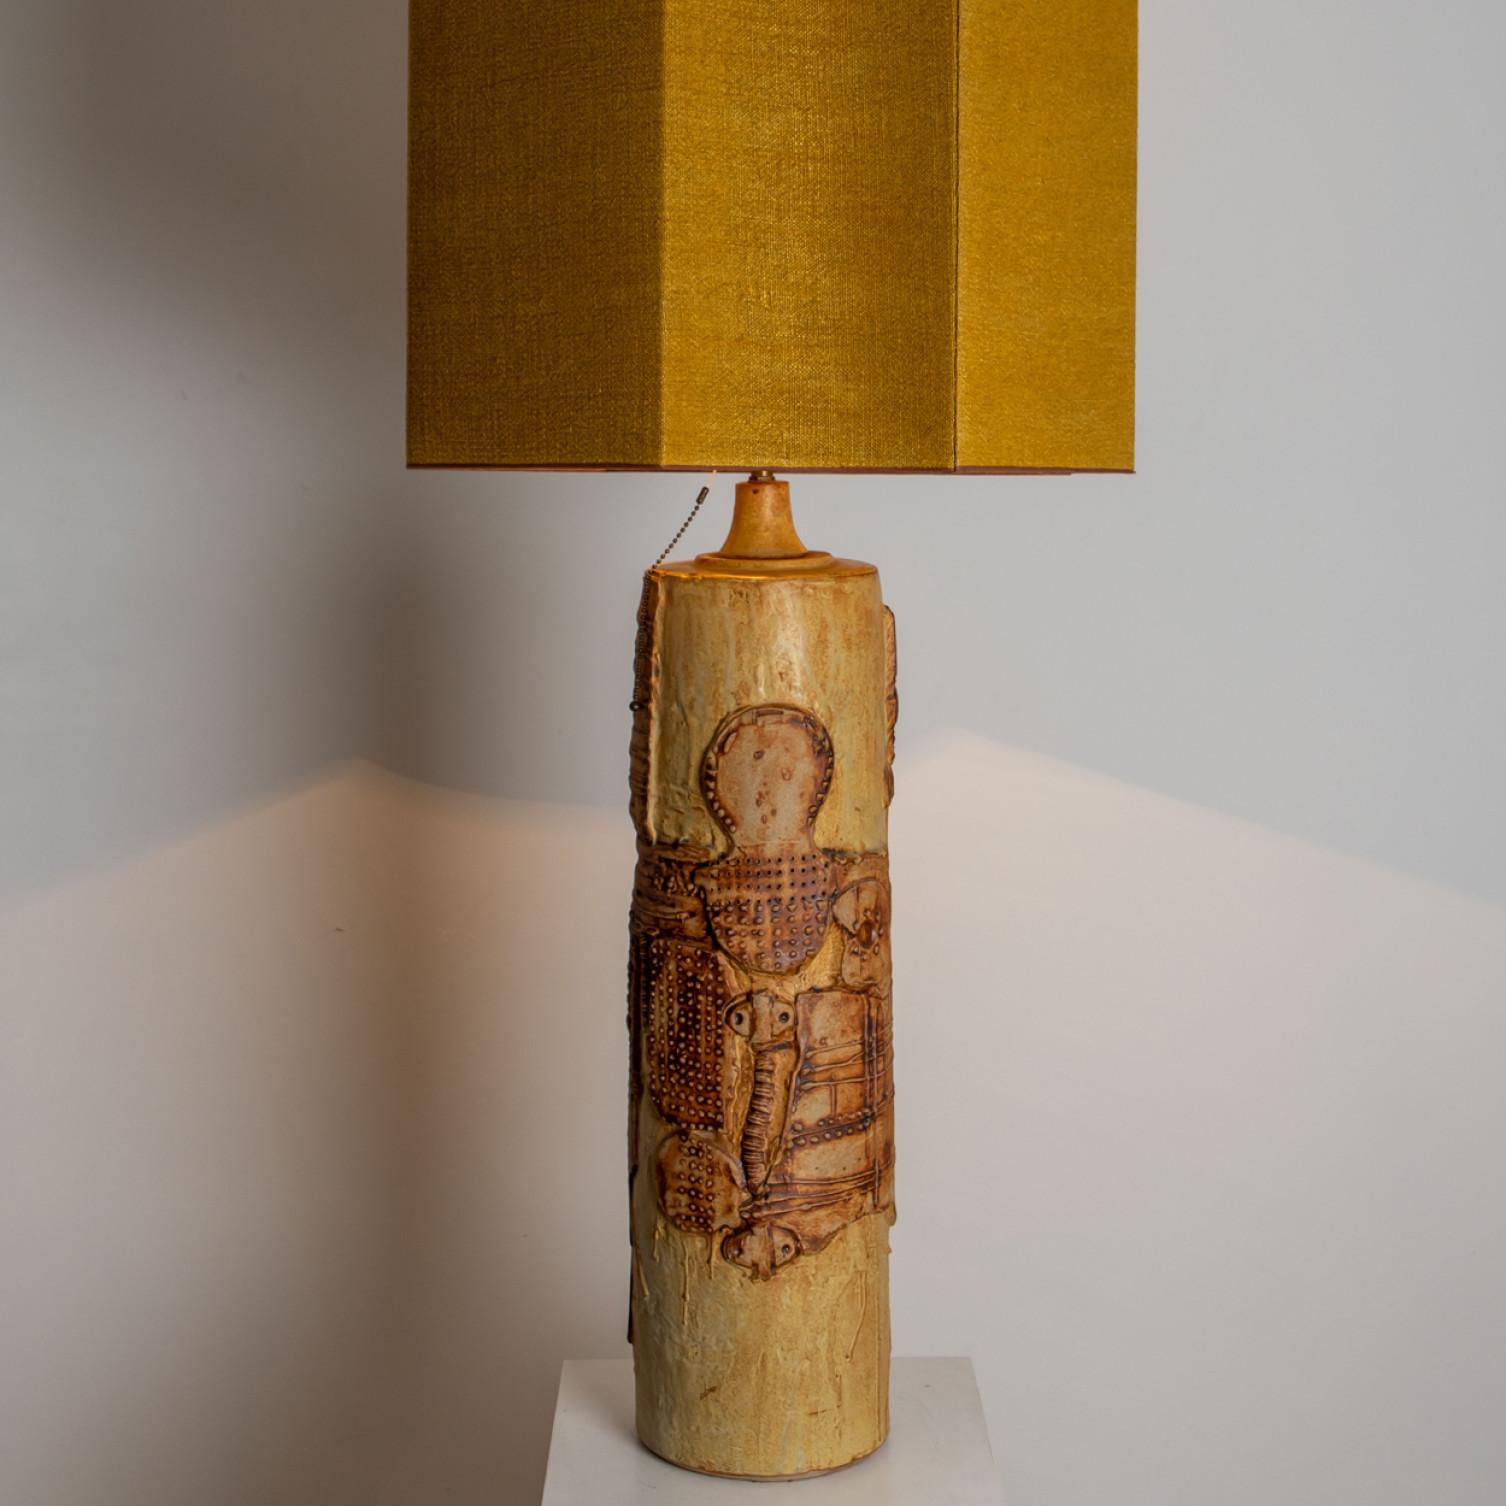 Large B. Rooke Ceramic Lamp, 1960s with Custom Made Silk Lampshade by René Hoube For Sale 1